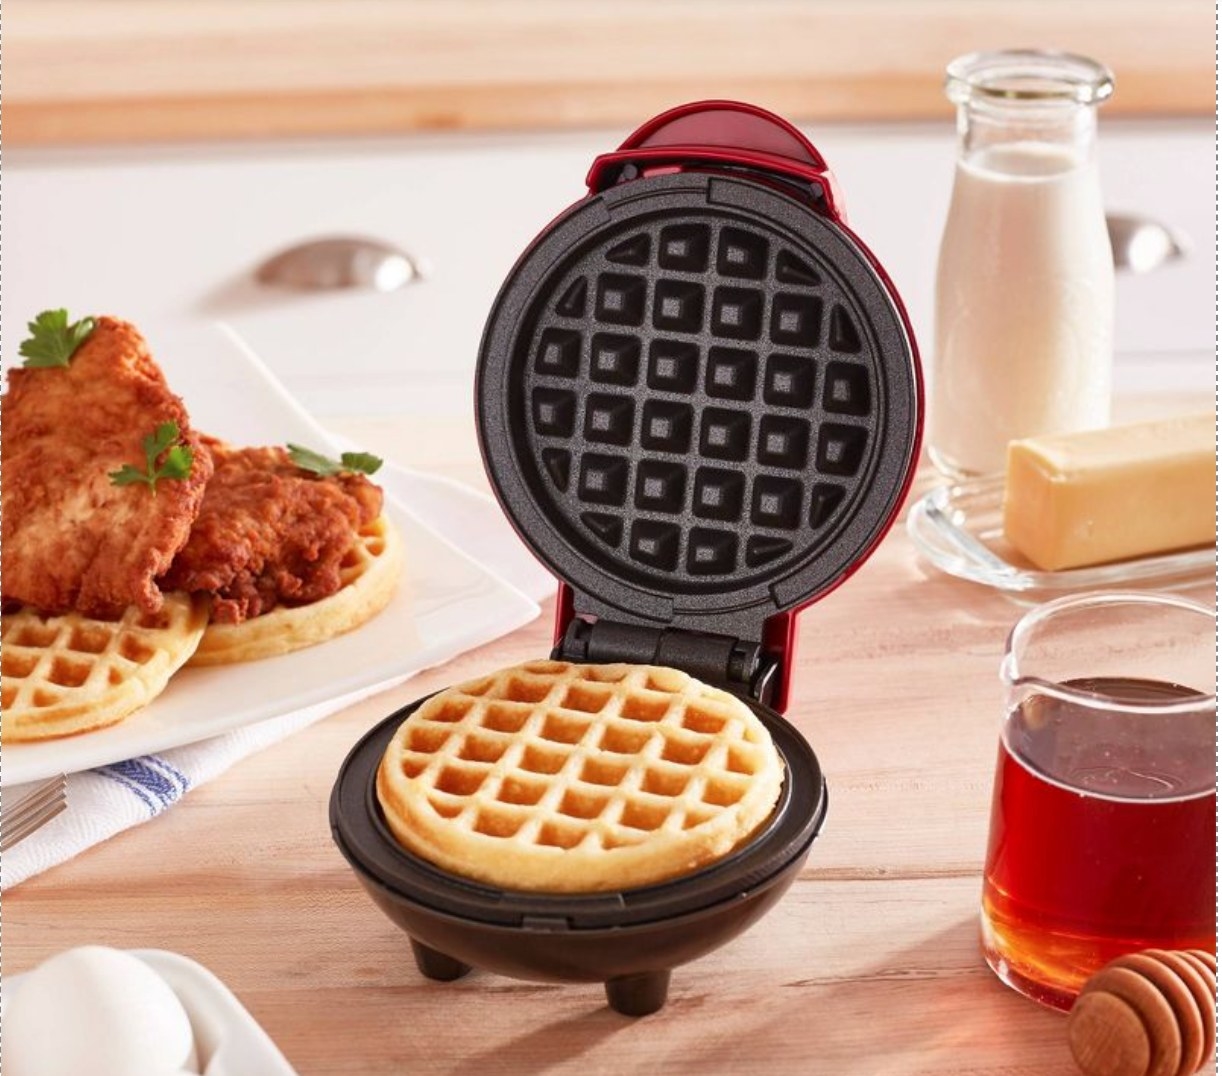 the small red waffle maker open on a counter to show the waffle inside. surrounding it are waffle ingredients and a plate of chicken and waffles